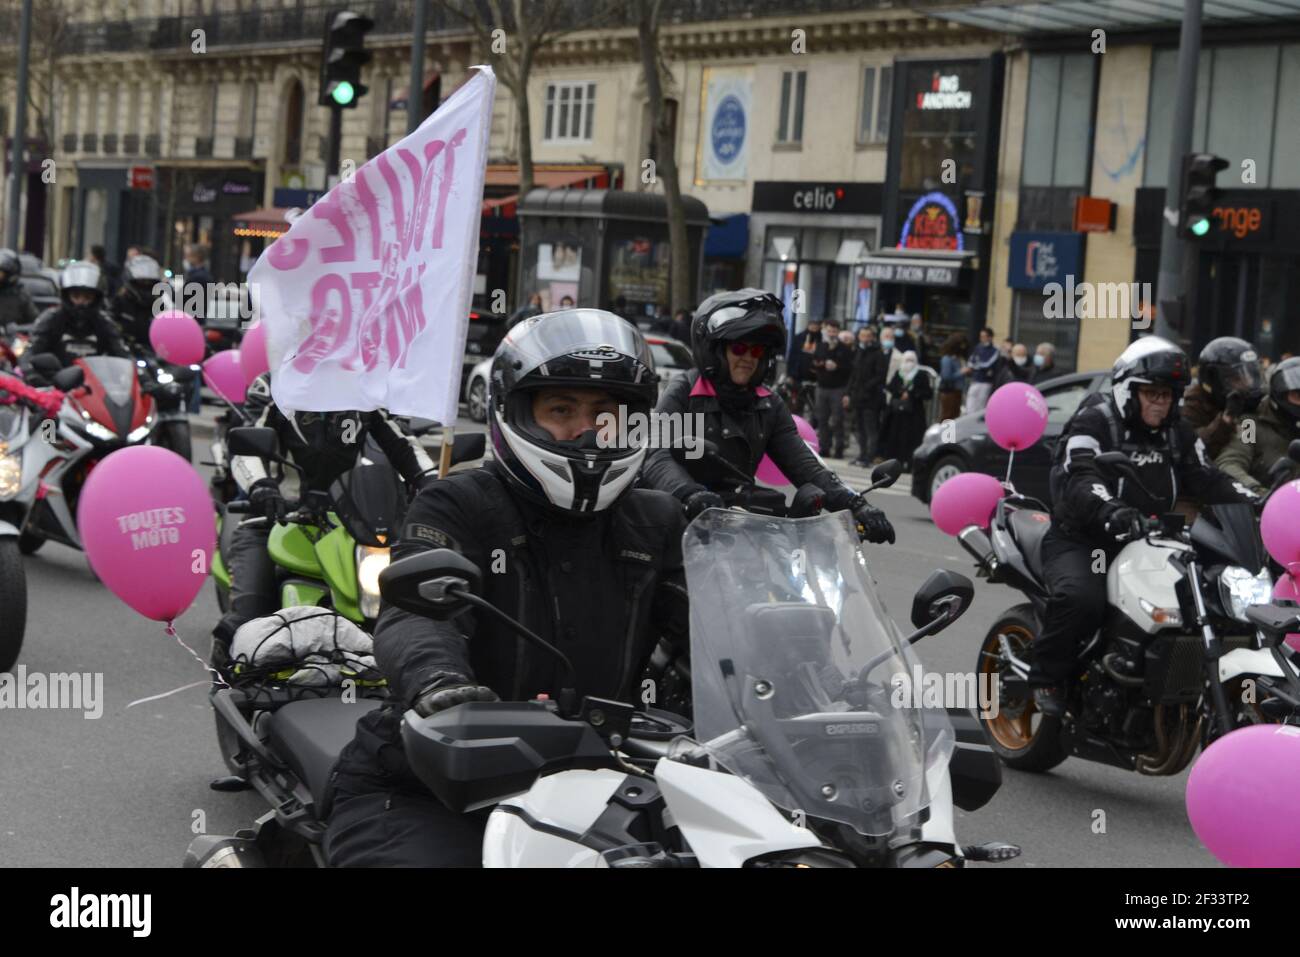 Toutes en moto" ("All Women By Motorcycle") event held across France, to  celebrate international women's rights day. Paris, France on March 14,  2021. Photo by Georges Darmon/Avenir Pictures/ABACAPRESS.COM Stock Photo -  Alamy